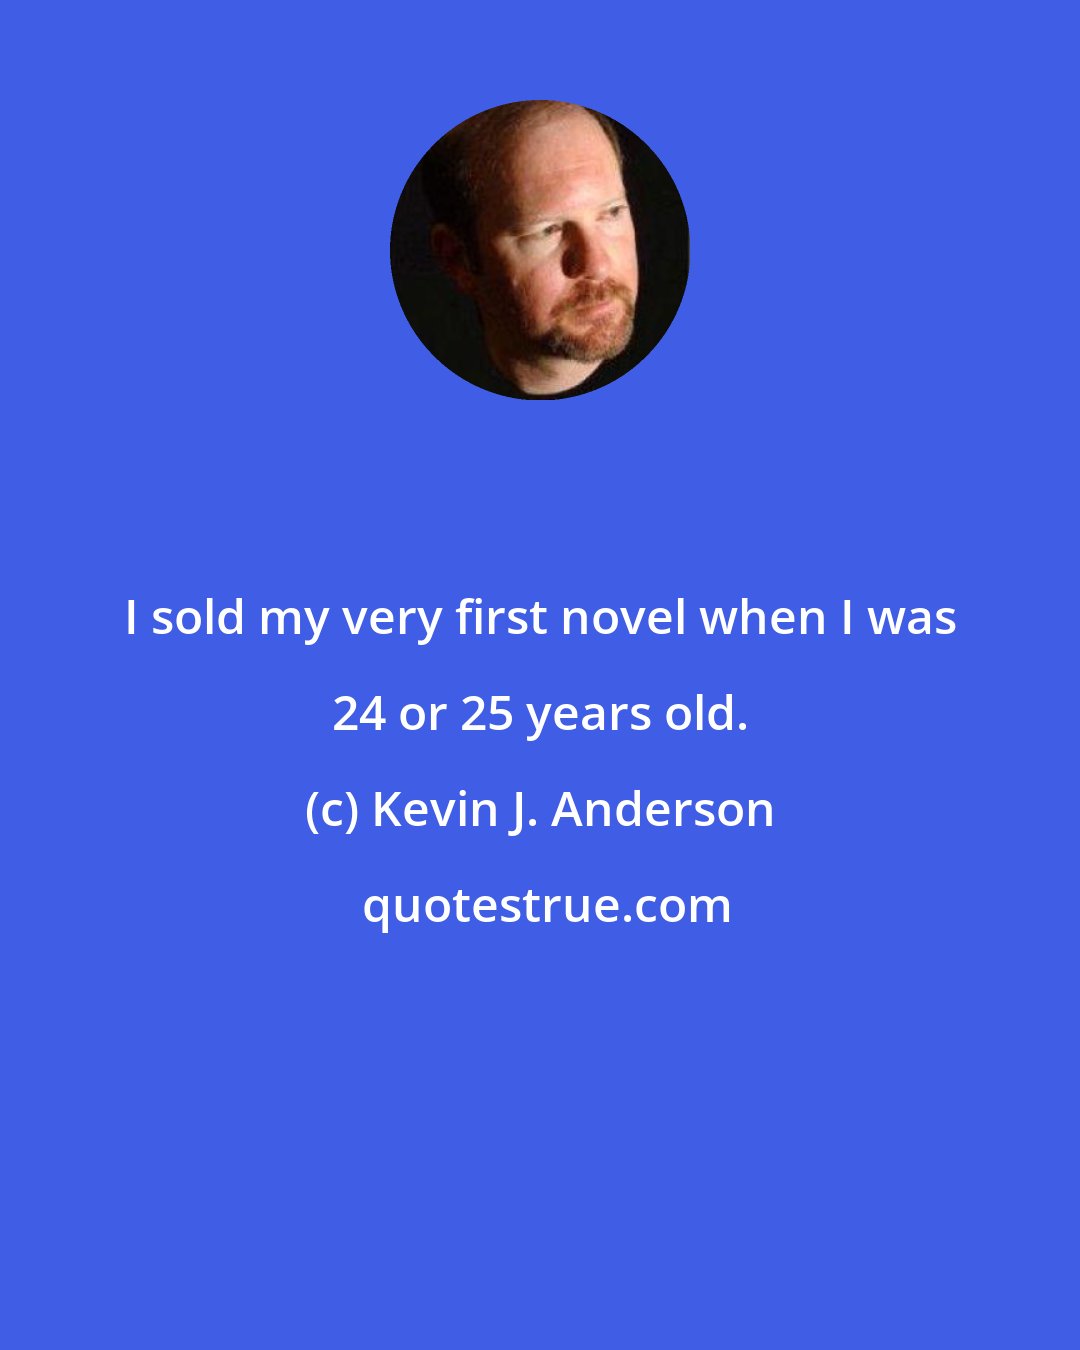 Kevin J. Anderson: I sold my very first novel when I was 24 or 25 years old.